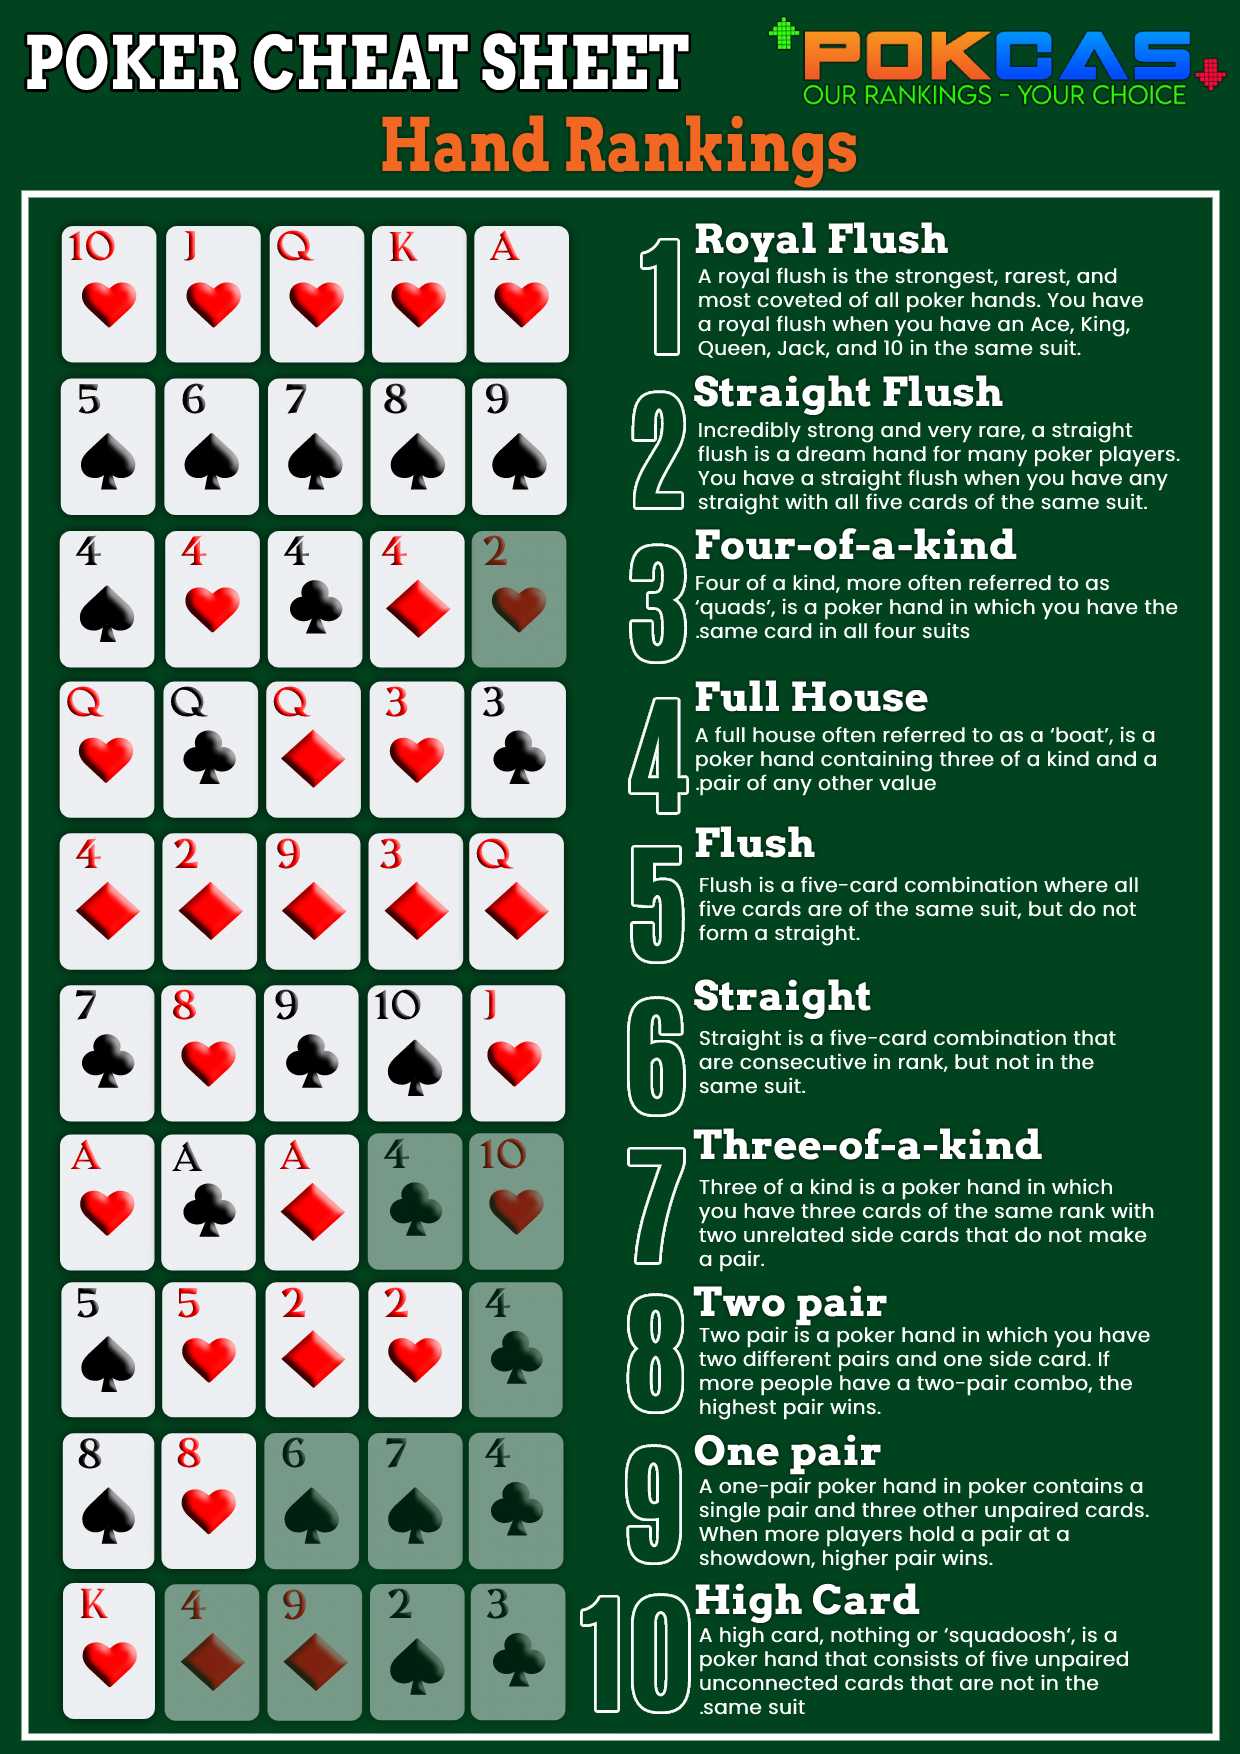 cheat-sheet-poker-hands-printable-the-frequency-shows-the-number-of-ways-to-draw-that-specific